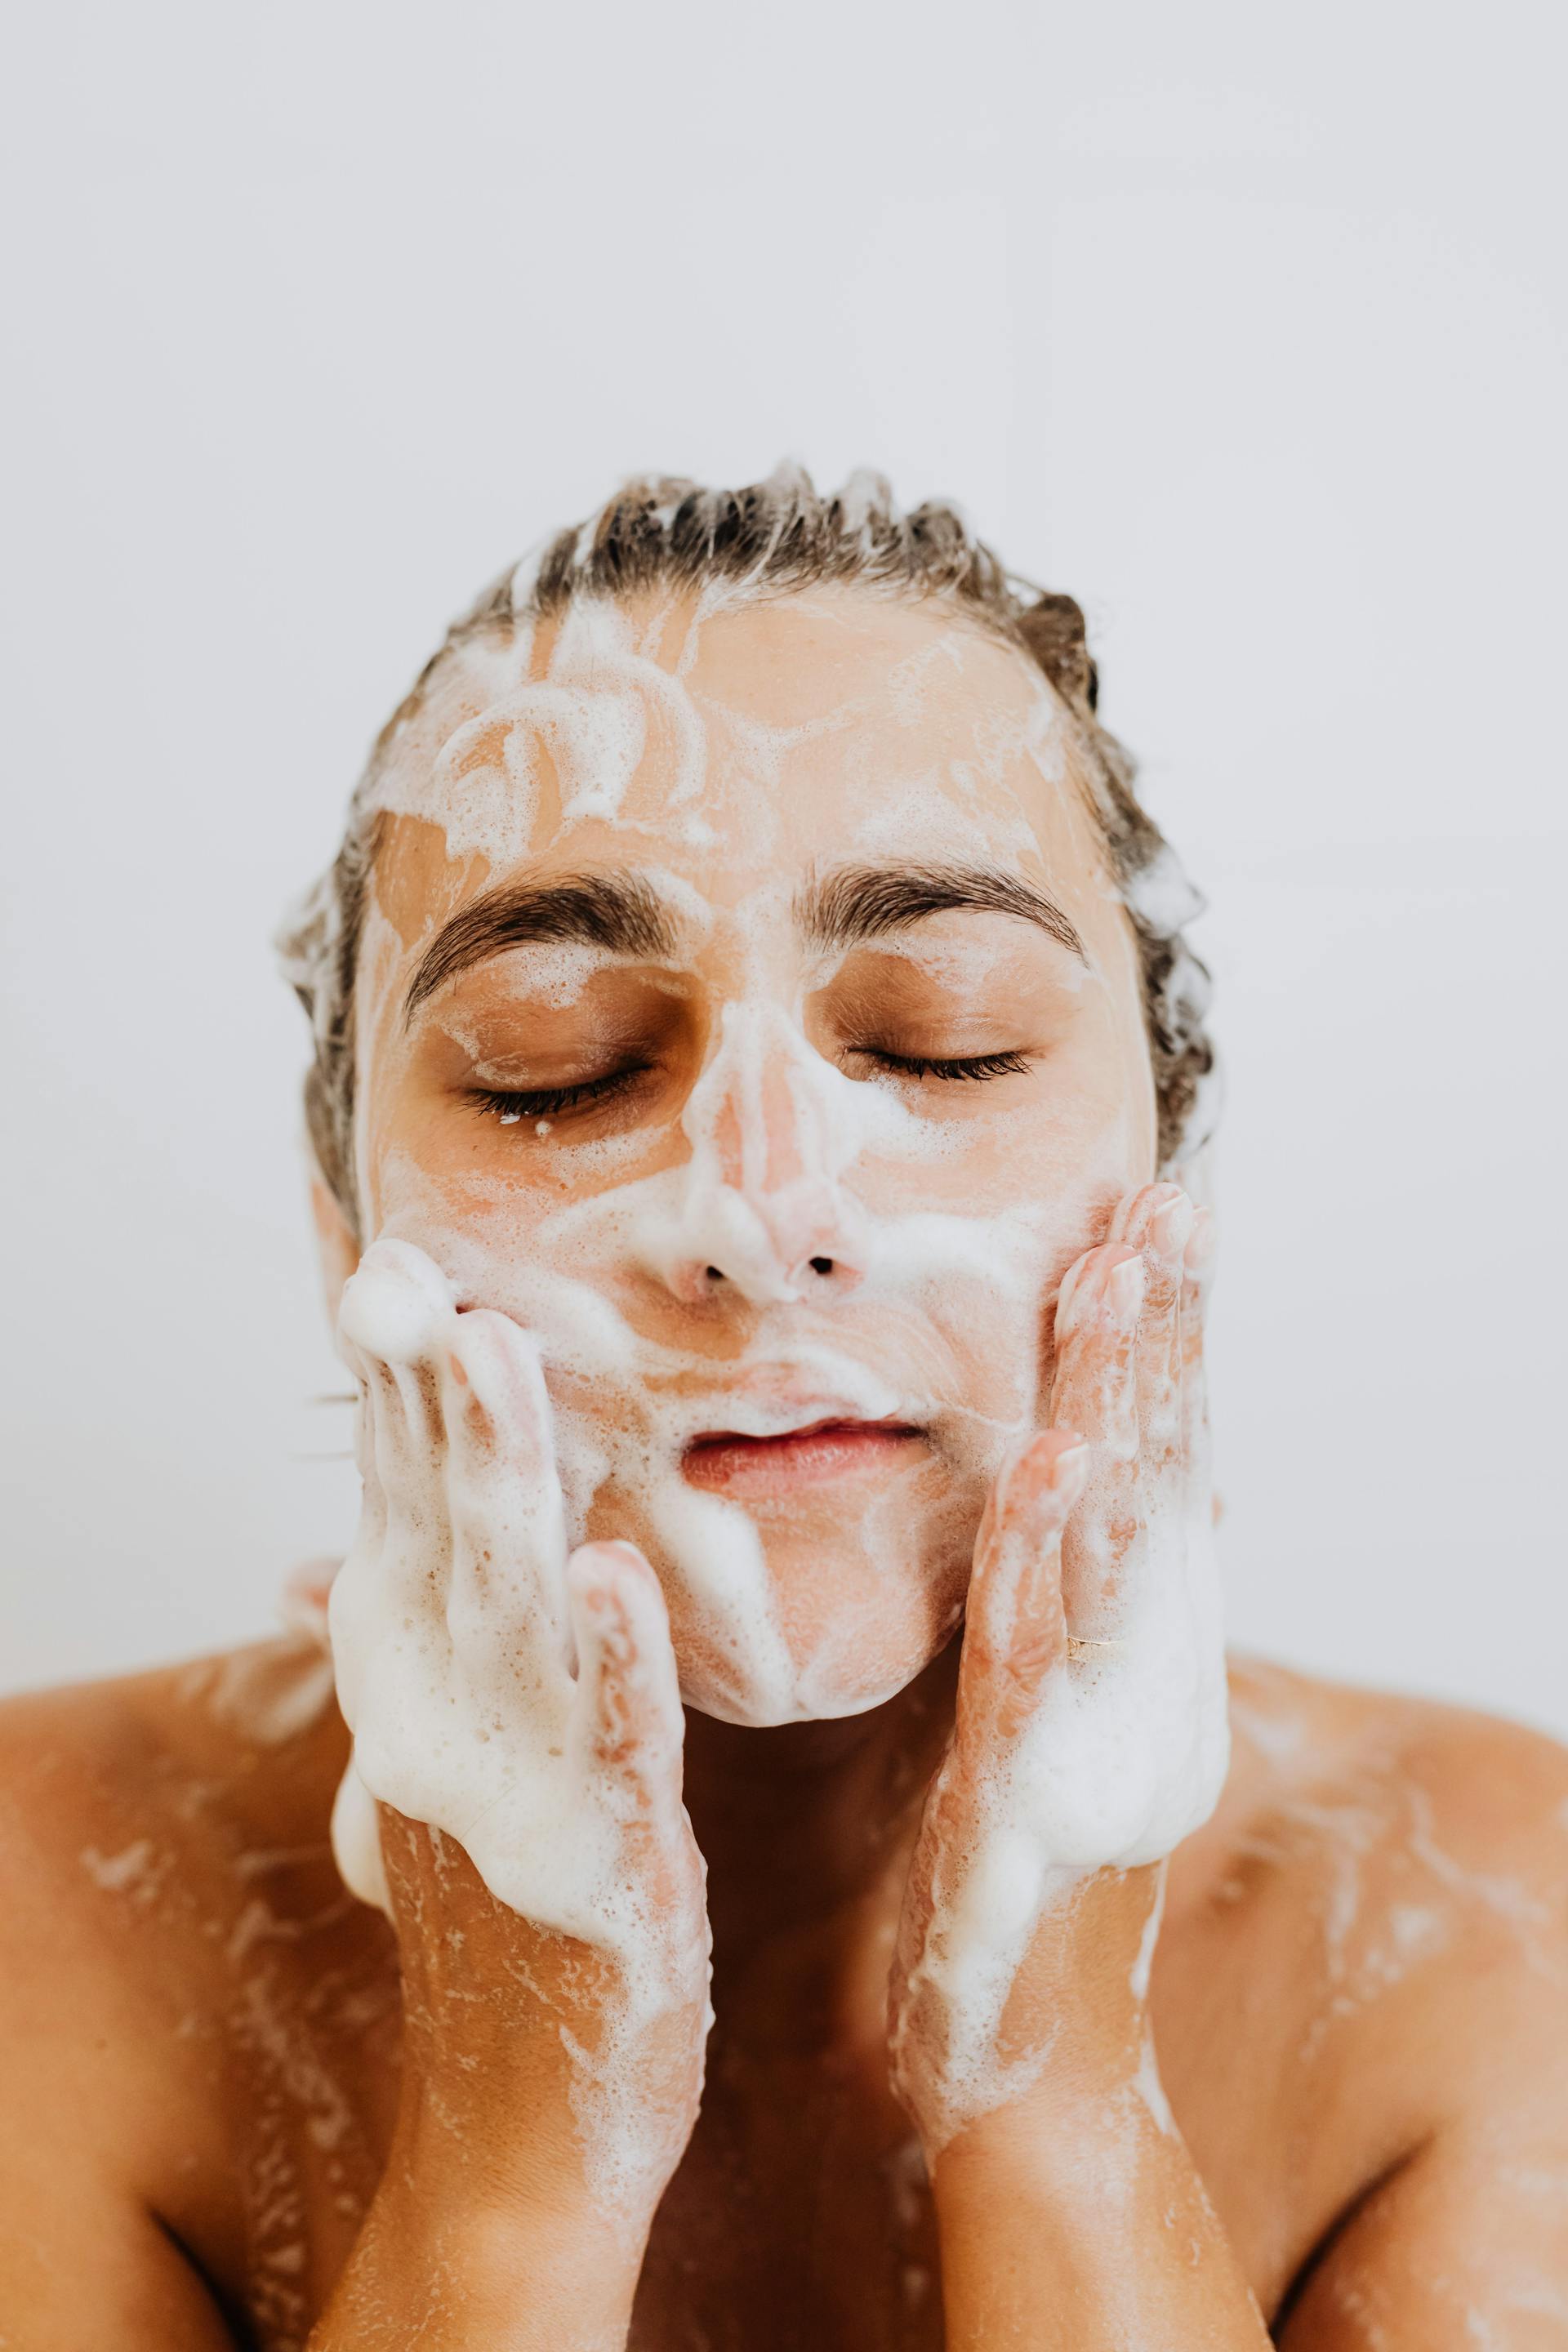 A woman washing her face | Source: Pexels